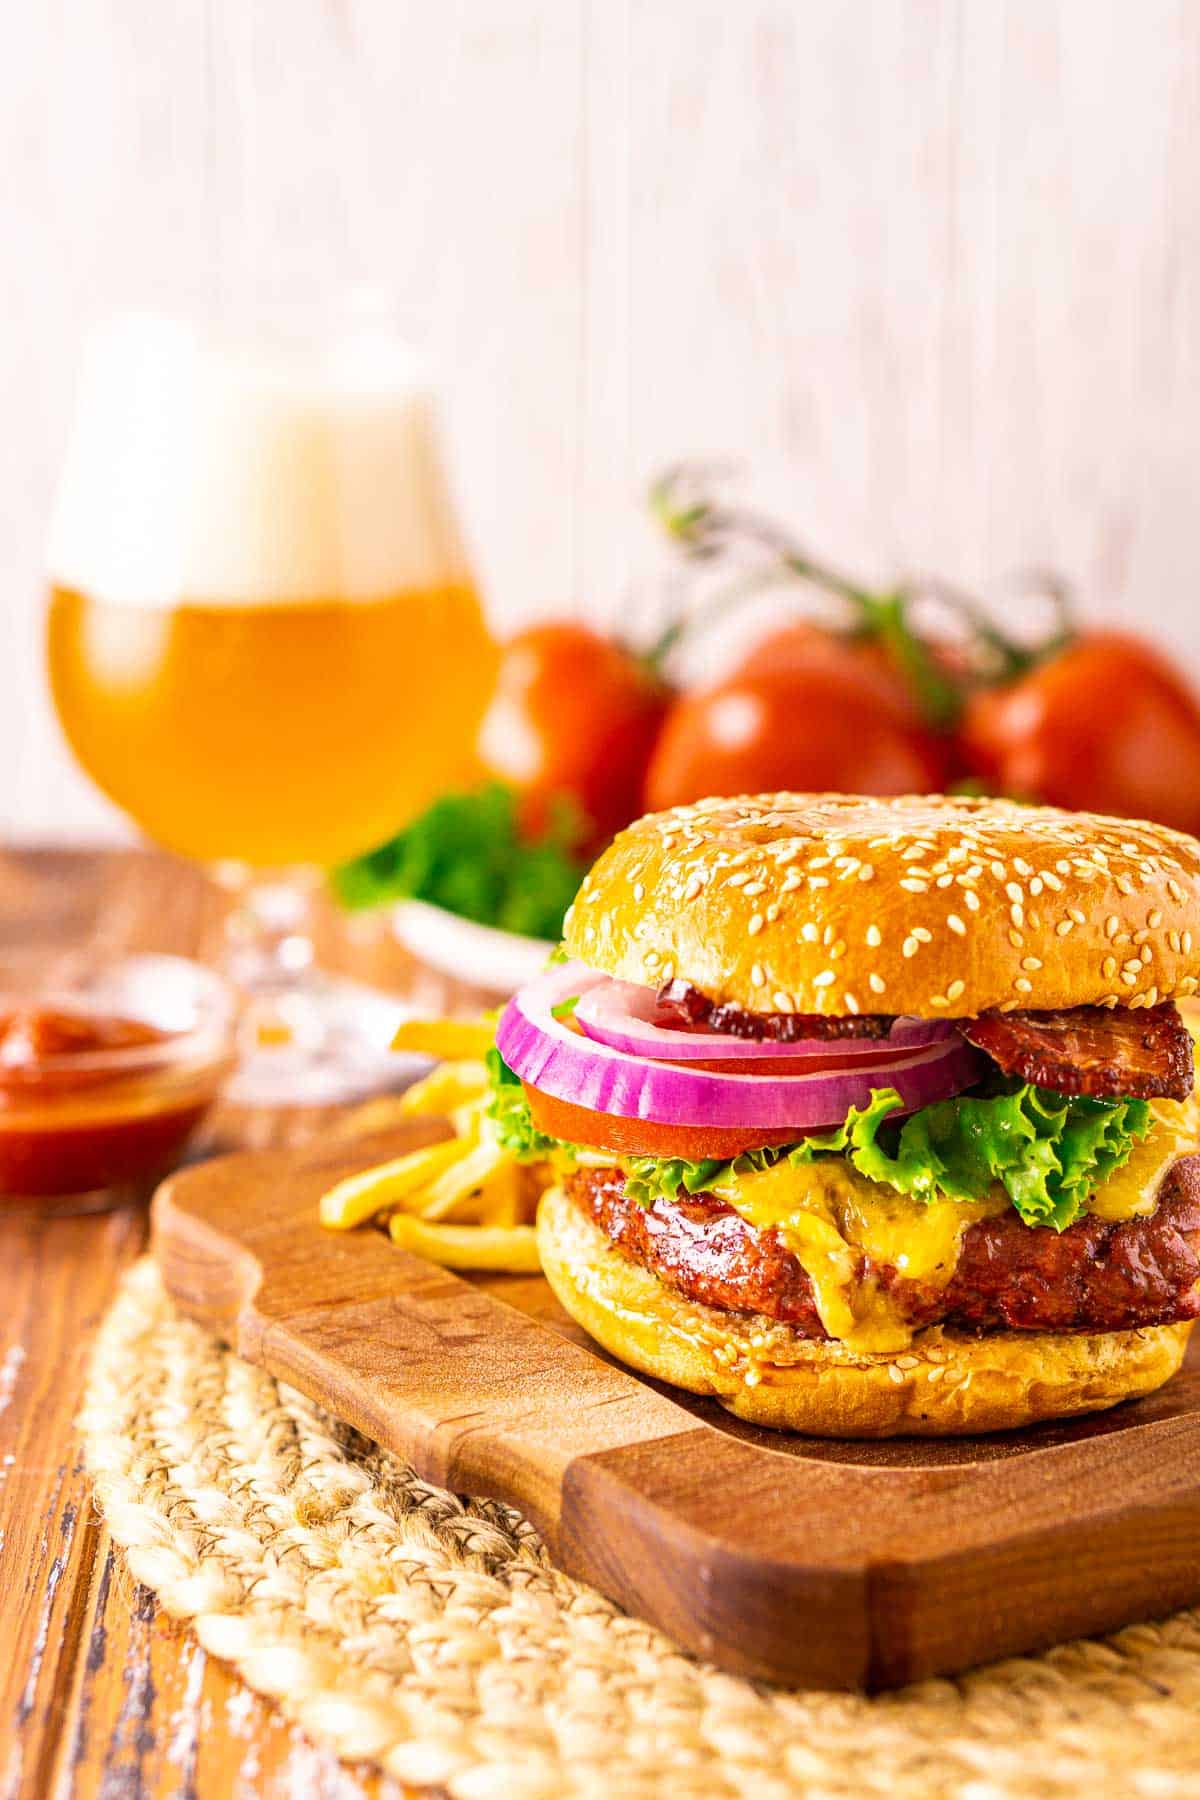 A smoked burger on a wooden surface with fries and a beer in the background.